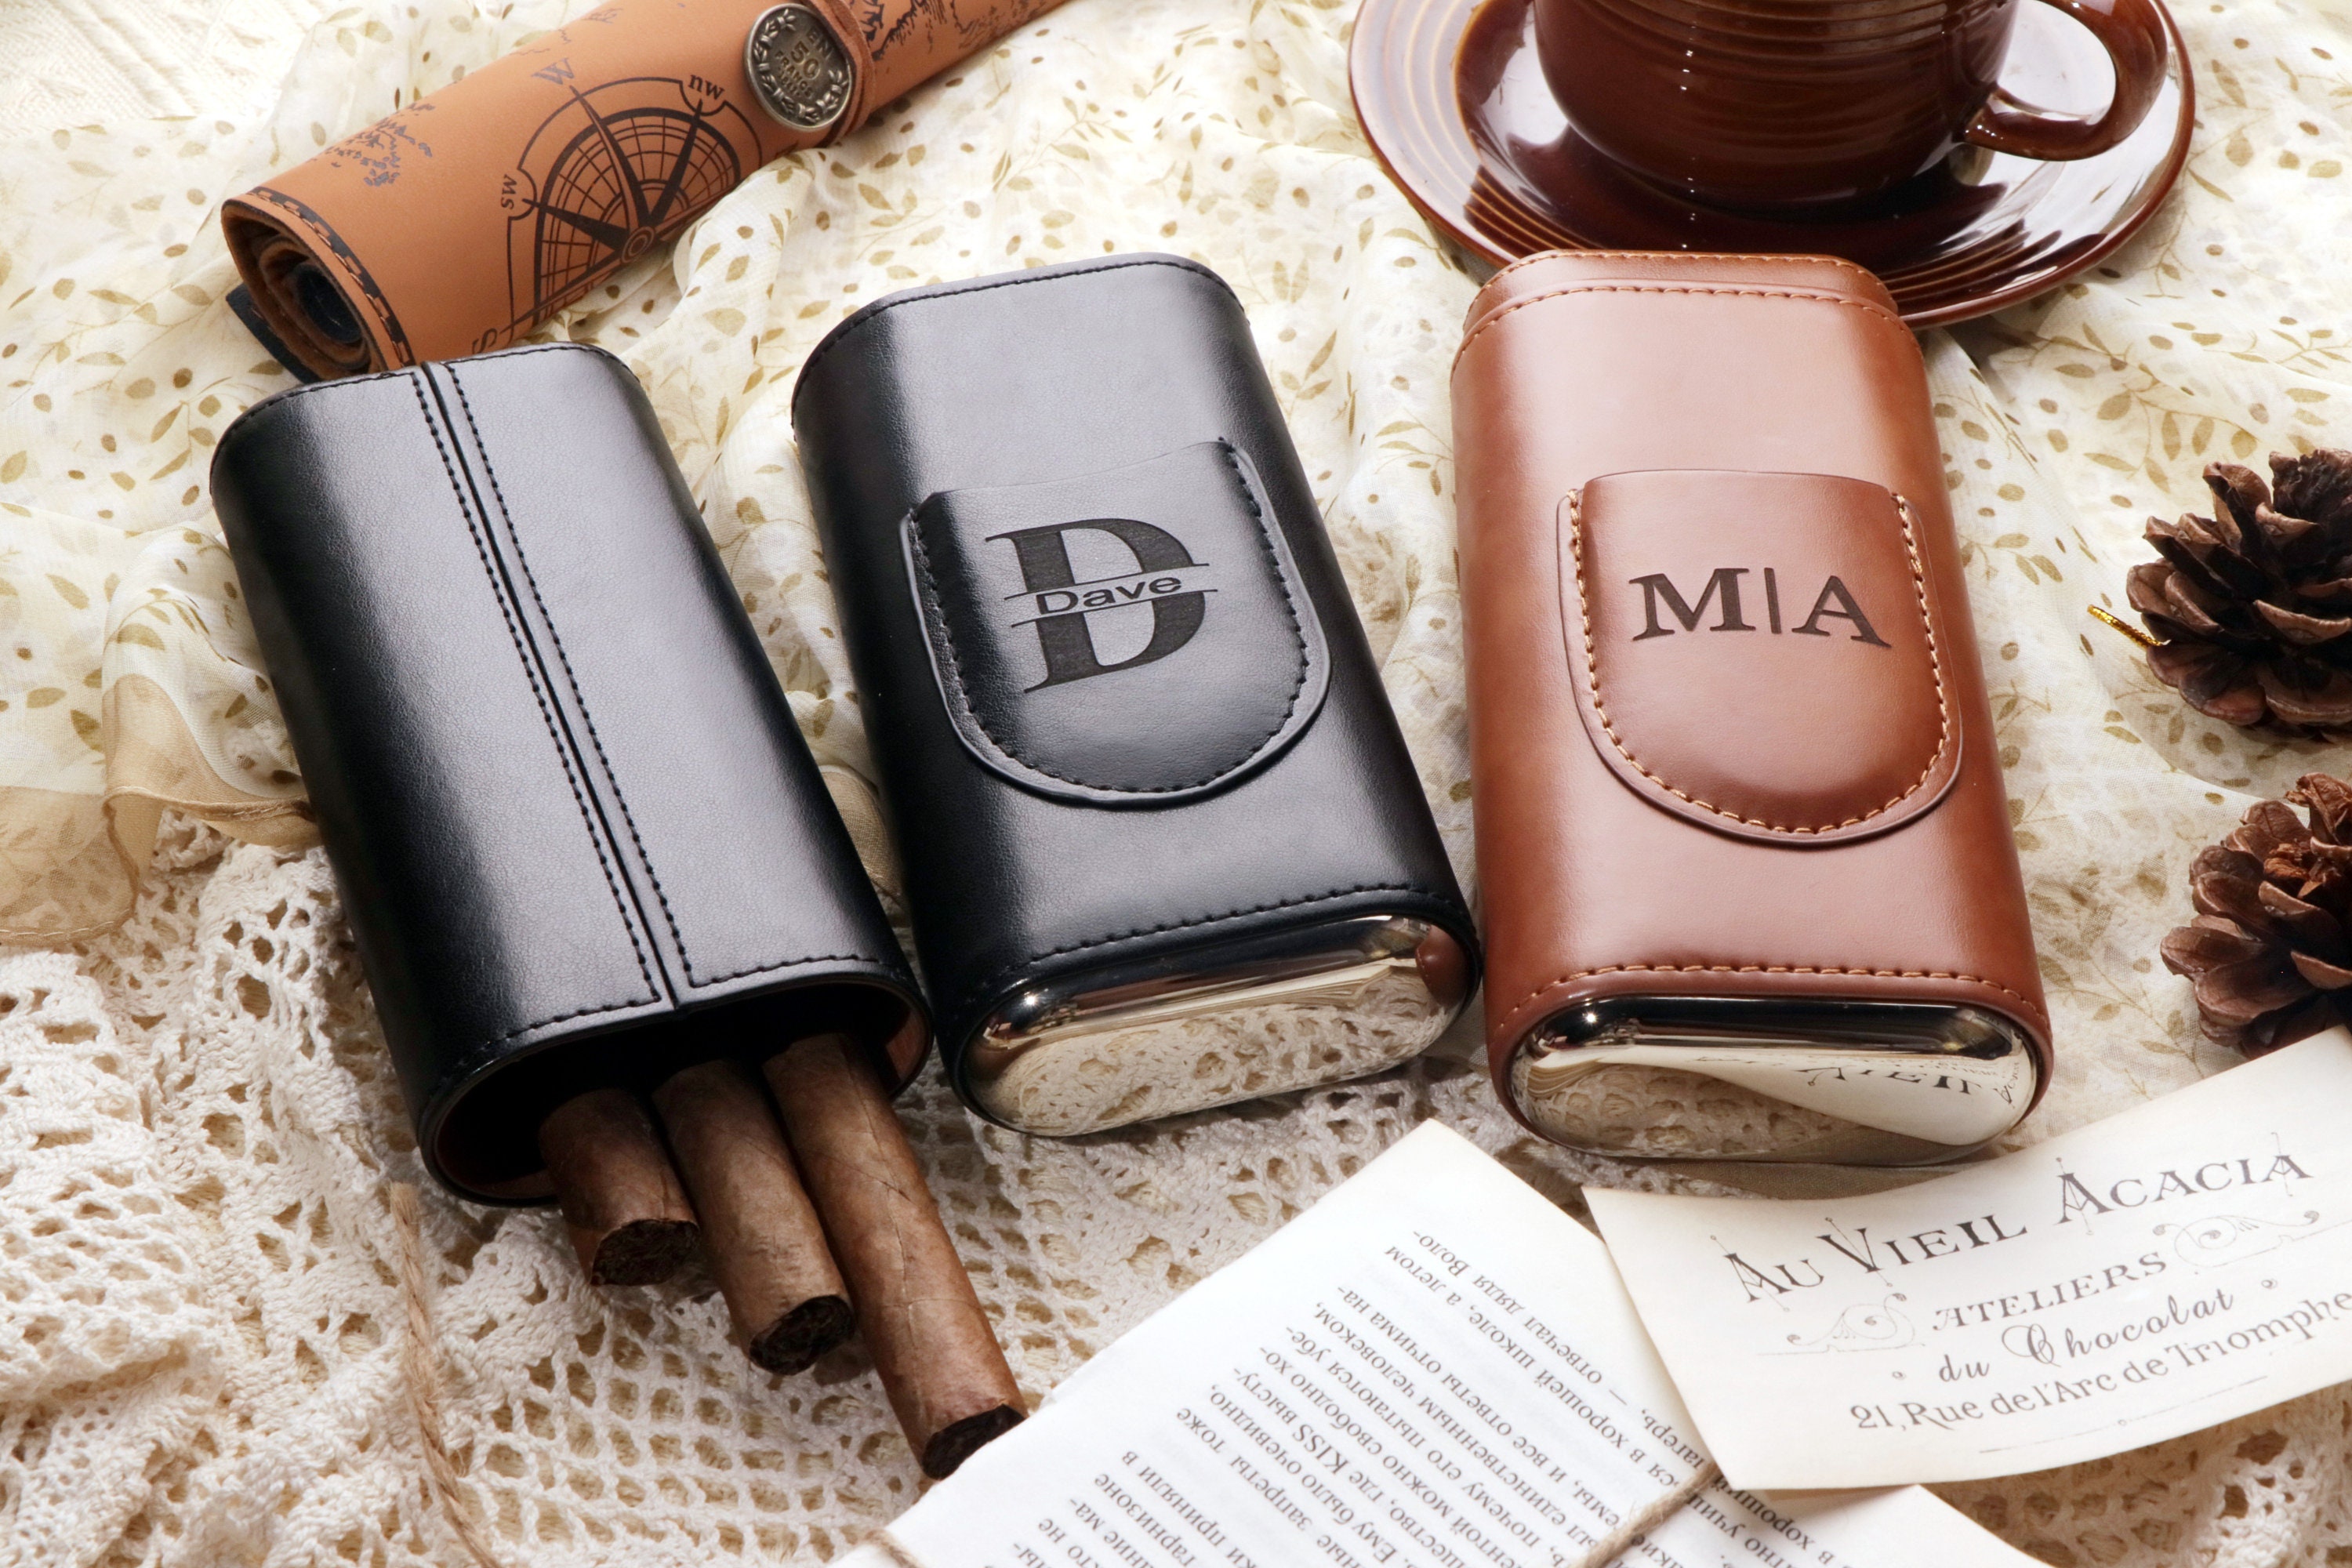 Cigars Case, Christmas Gifts for Him, Personalized Name, Cigar Accessories,  Leather Cigar Holder, Travel Humidor, Groomsmen Gifts 